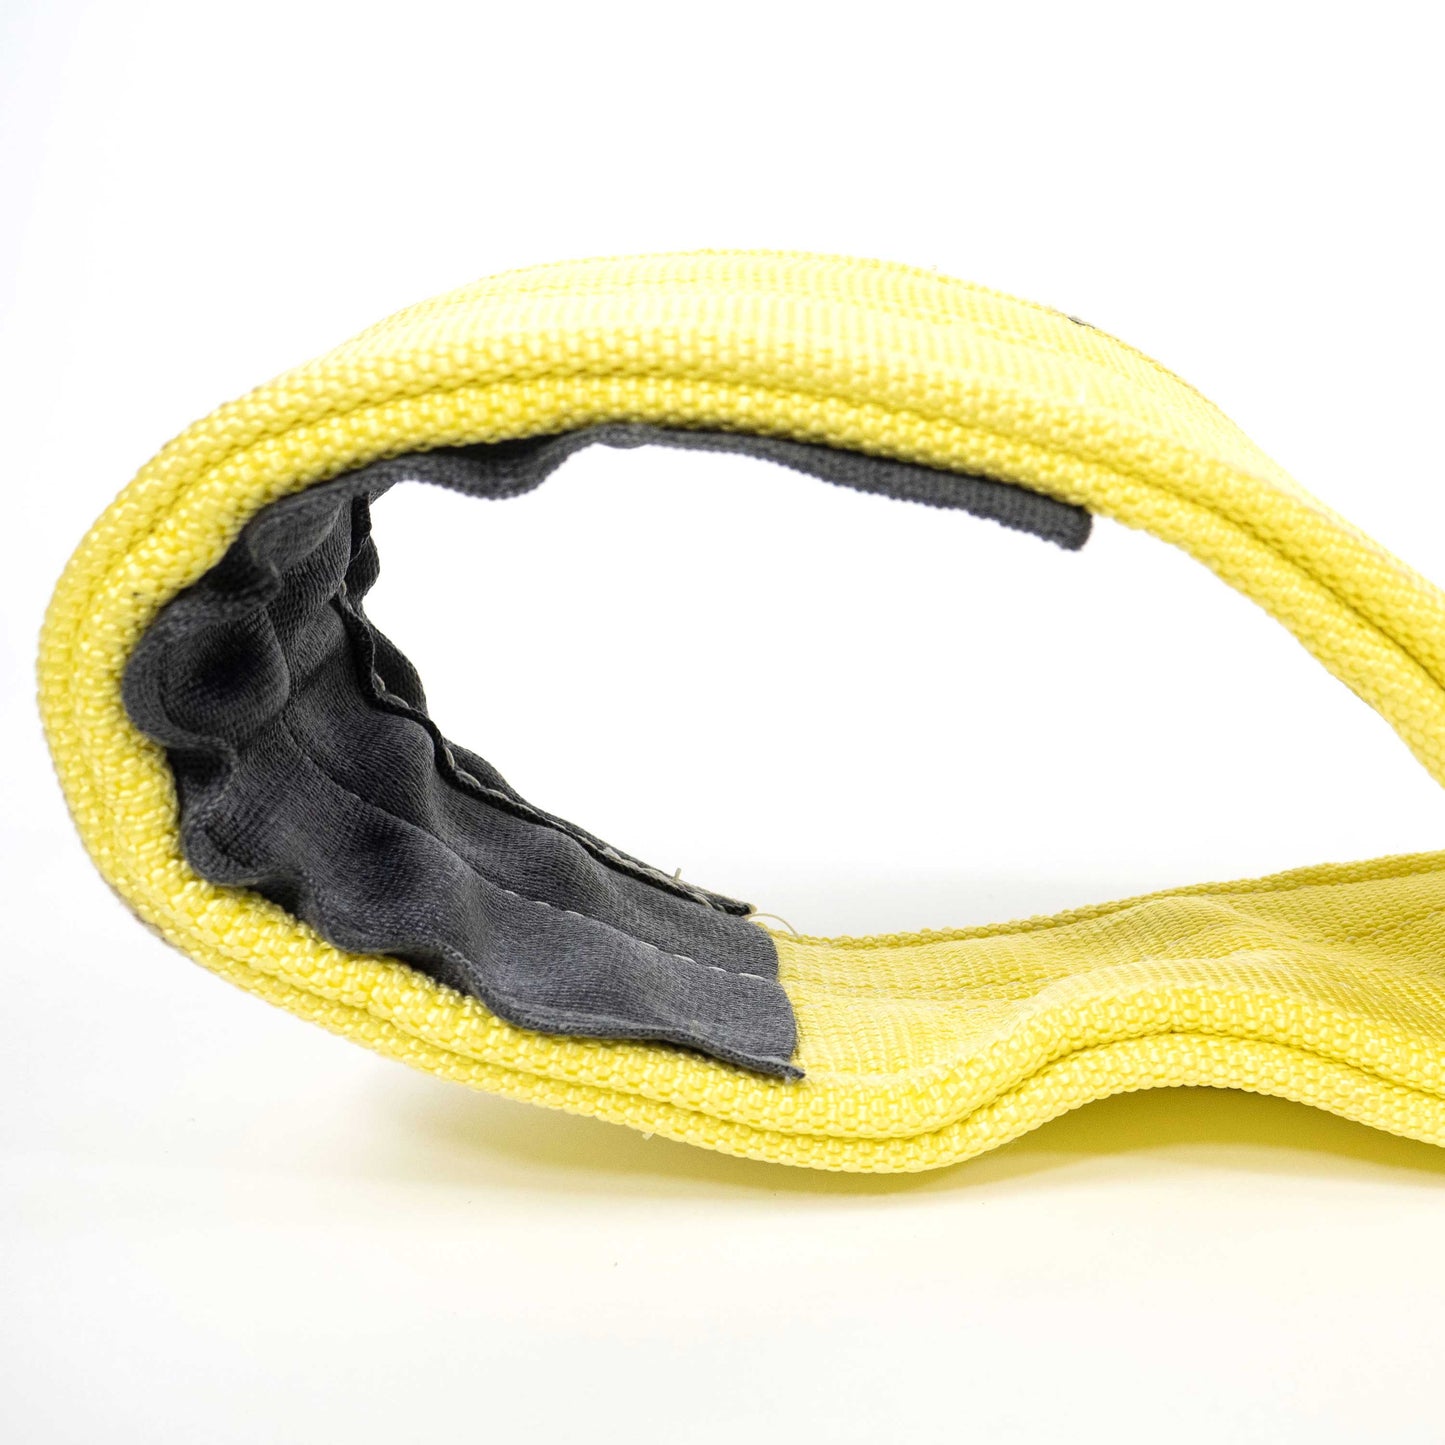 10" x 20' Heavy Duty Recovery Strap with Reinforced Cordura Eyes - 3 Ply | 90,000 WLL